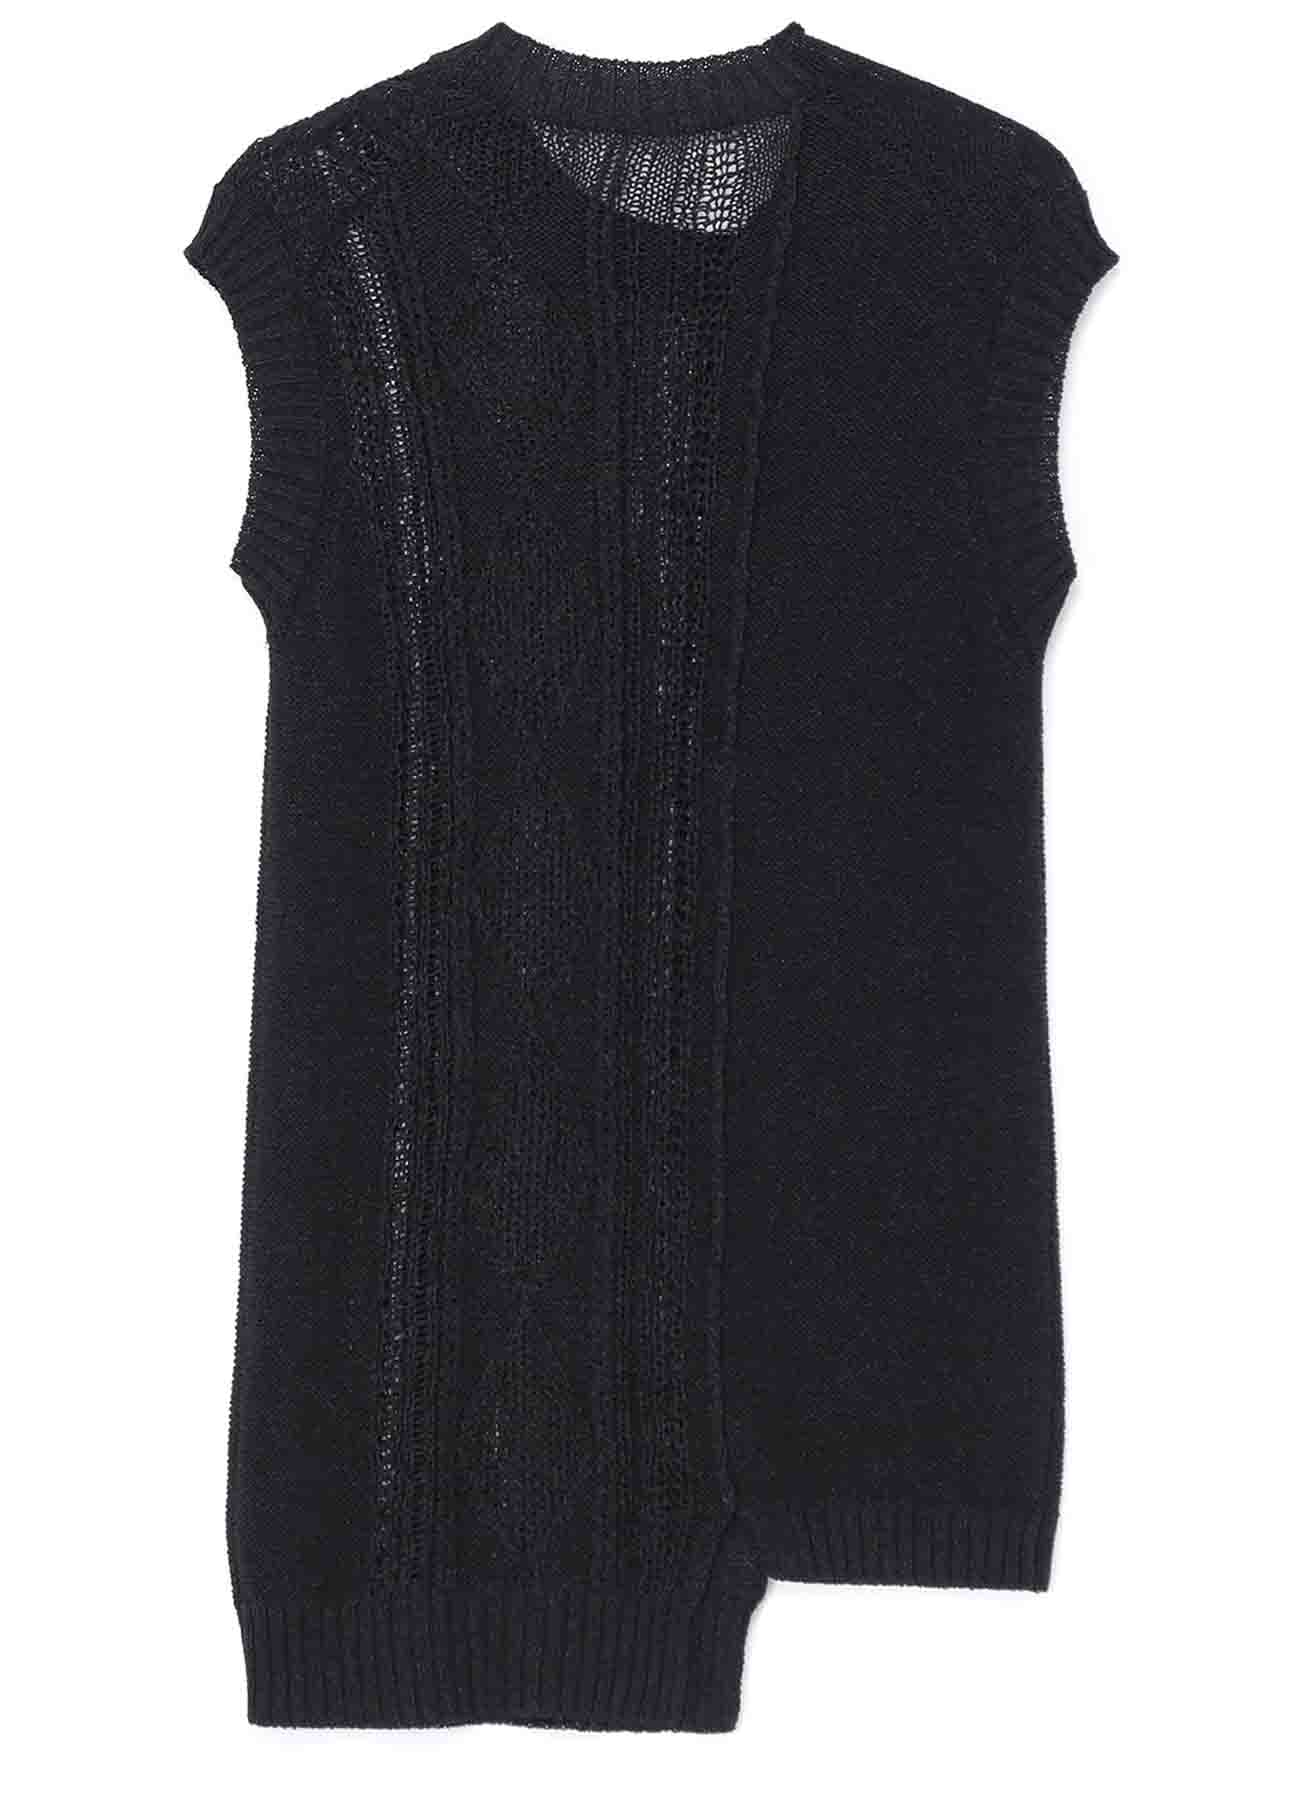 PLAIN STITCH BACK SIDE x CABLE SLEEVELESS PULLOVER